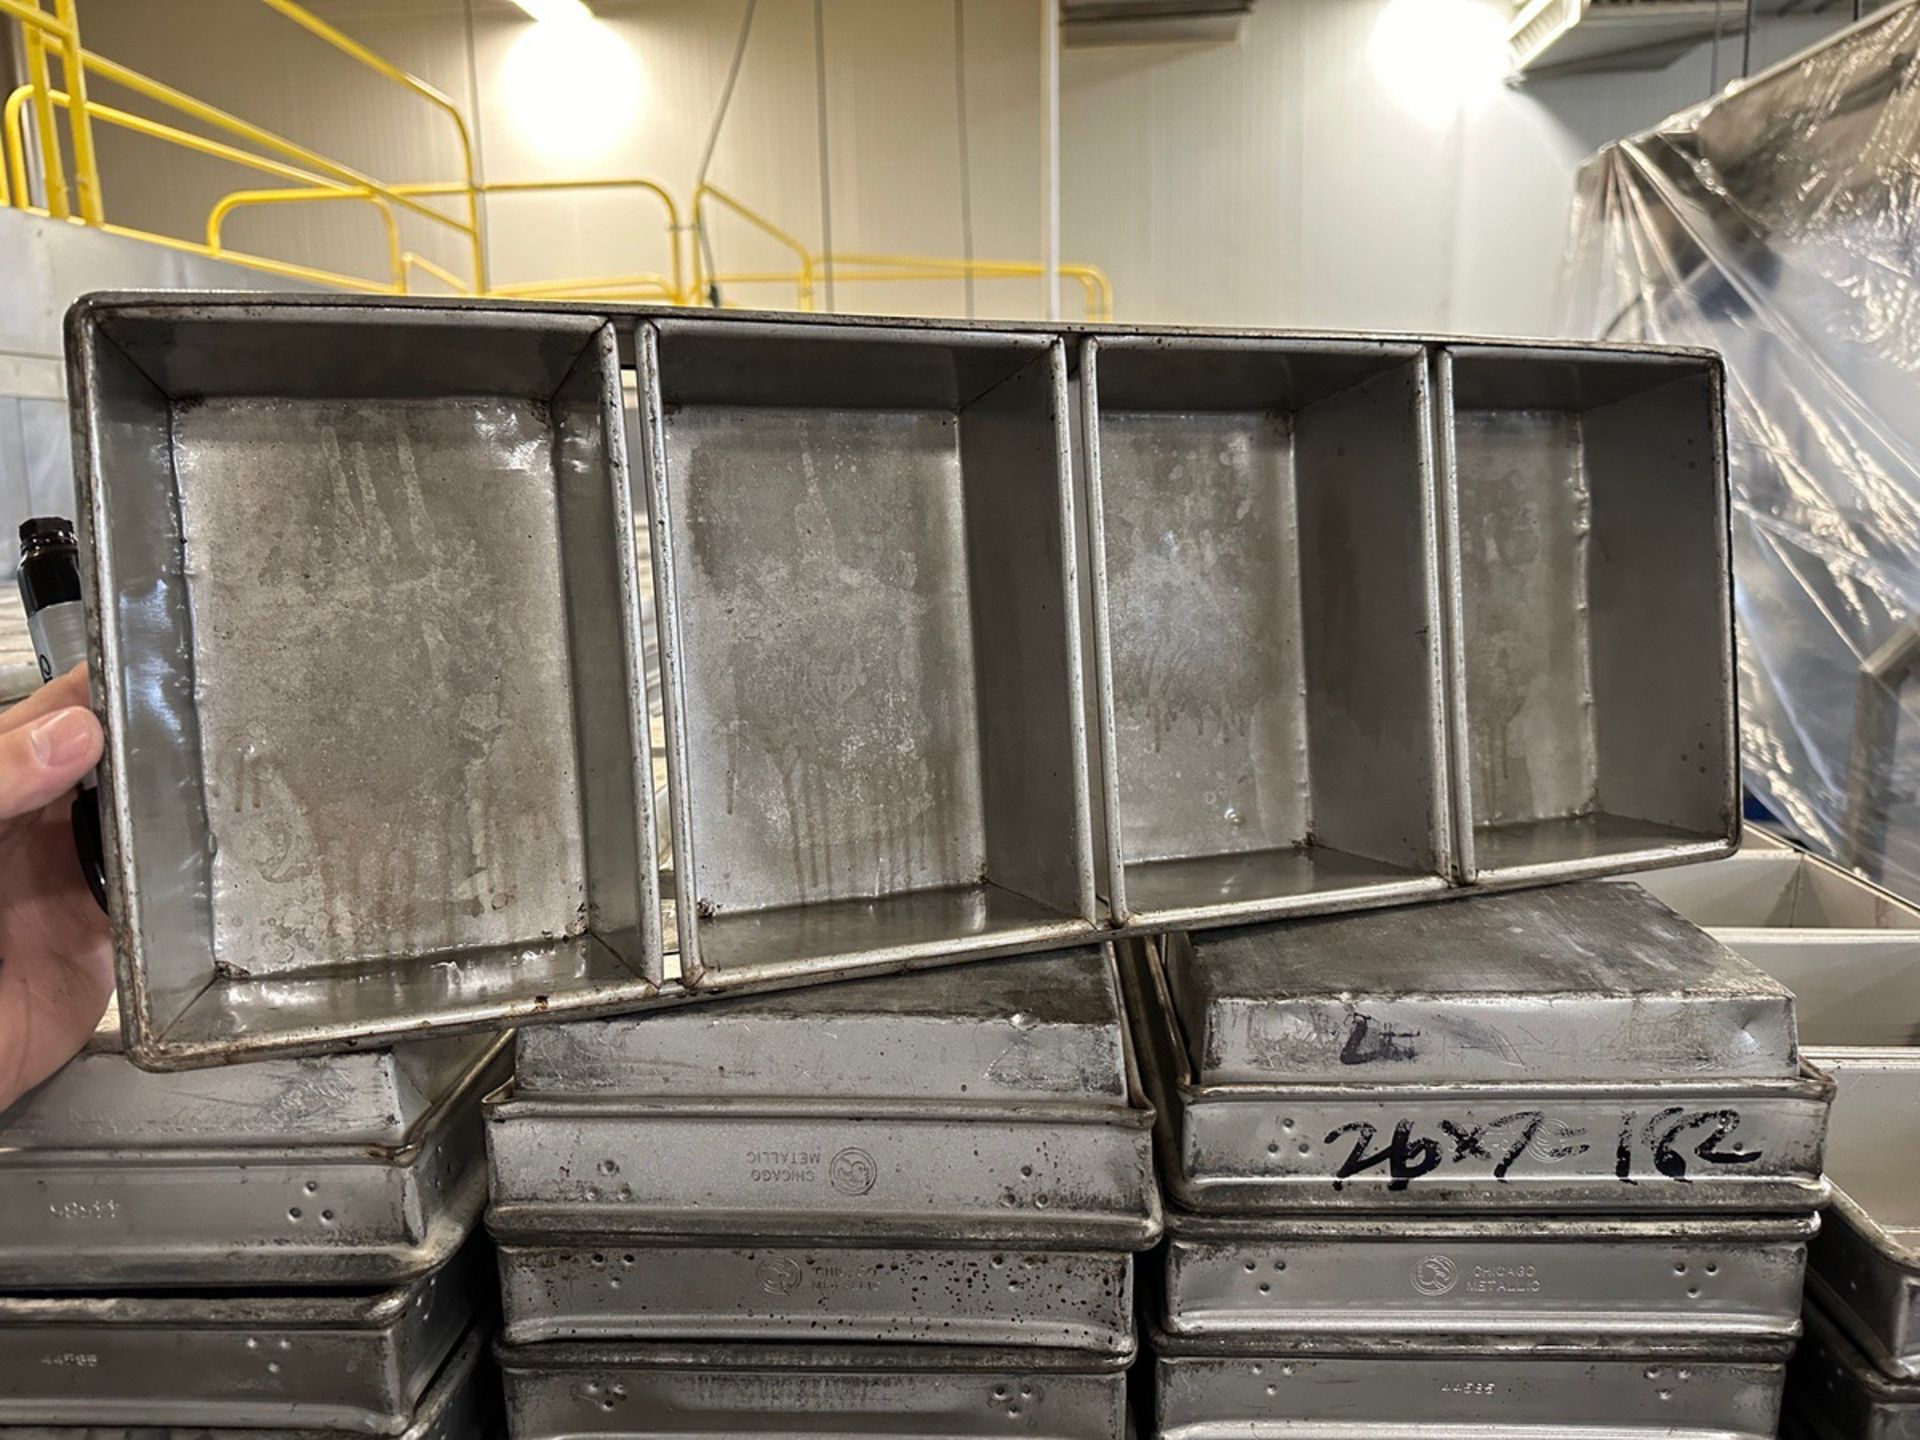 Approx. (182) 4-Loaf Bread Baking Pans on Heavy Duty Pan Cart (Approx. 9" x 25.5") | Rig Fee $50 - Image 3 of 4